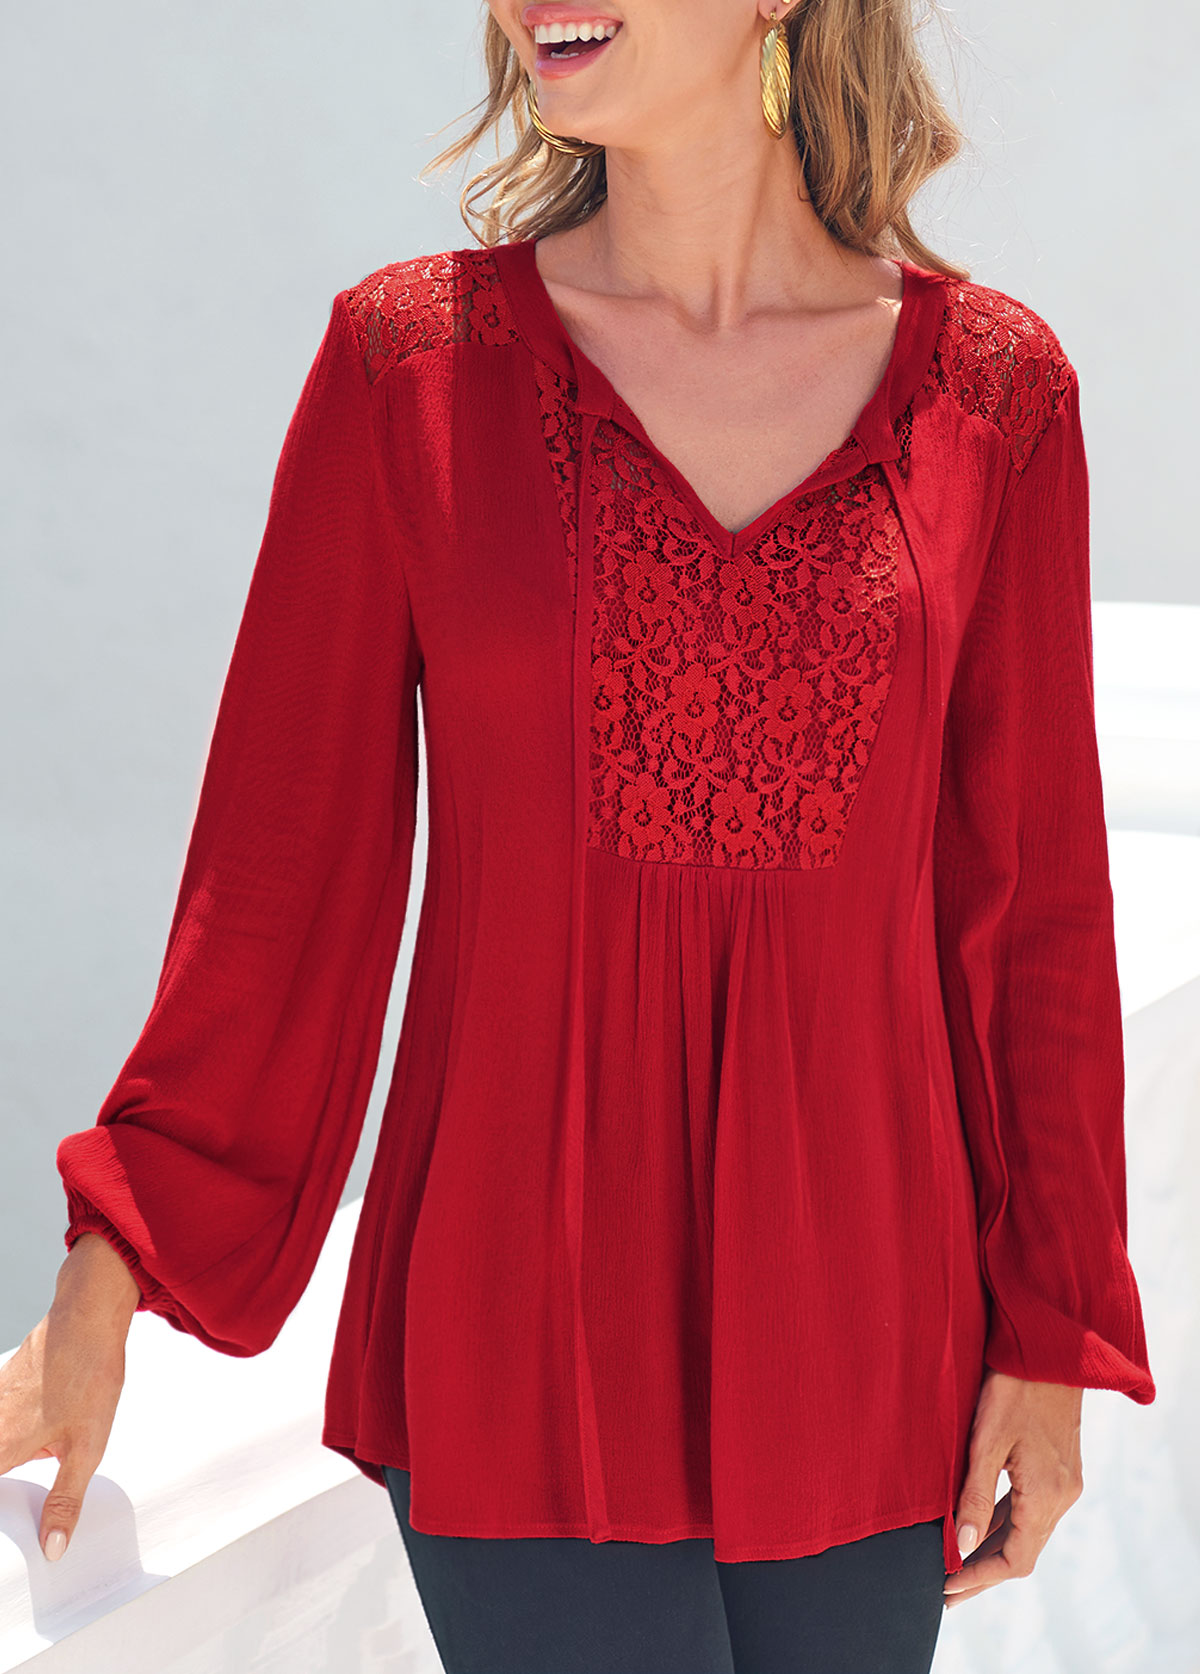 Lace Stitching Long Sleeve Red T Shirt